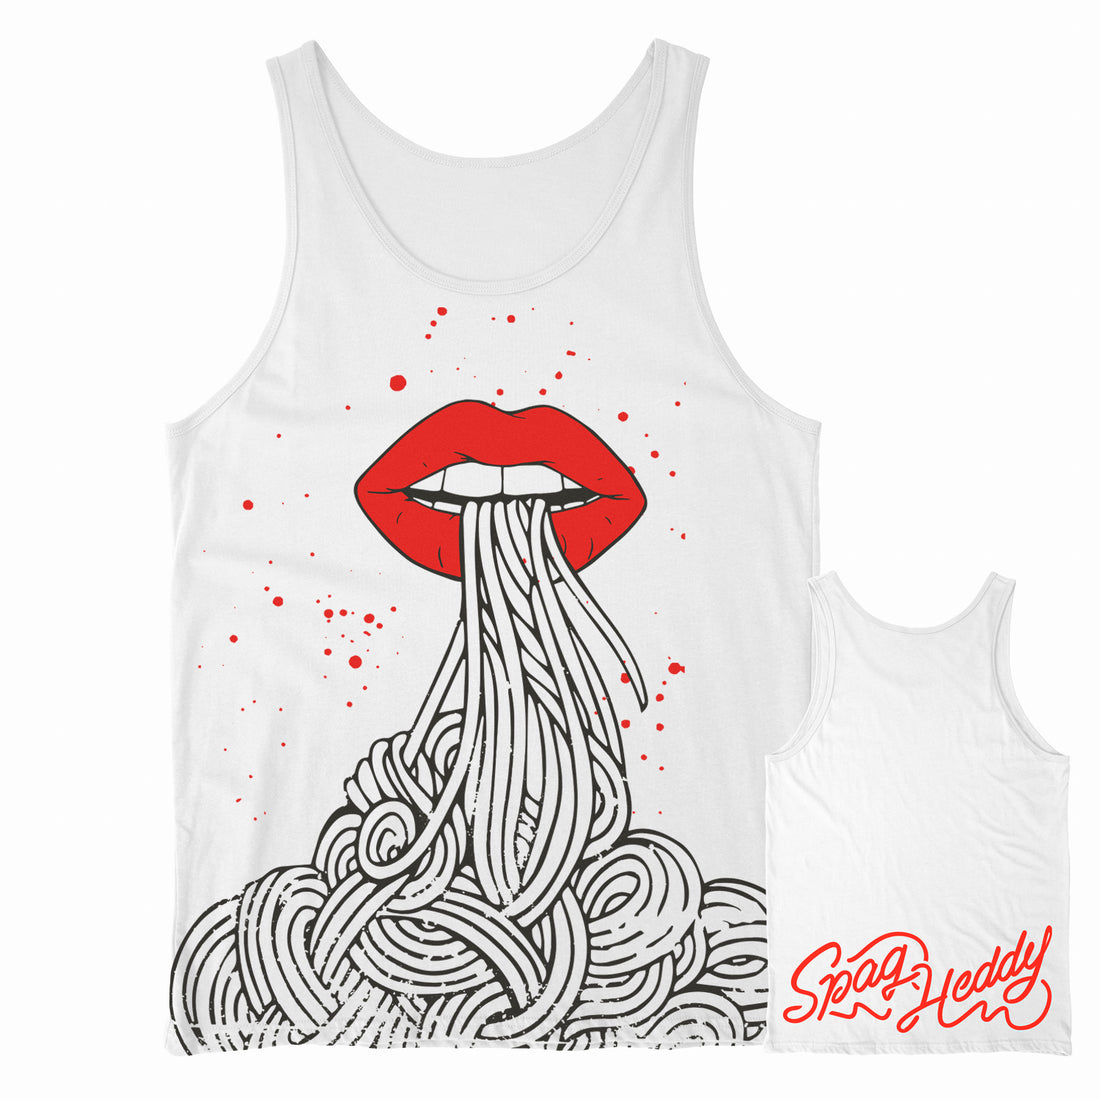 Spag Heddy - Saucy Lips - White Tank Top